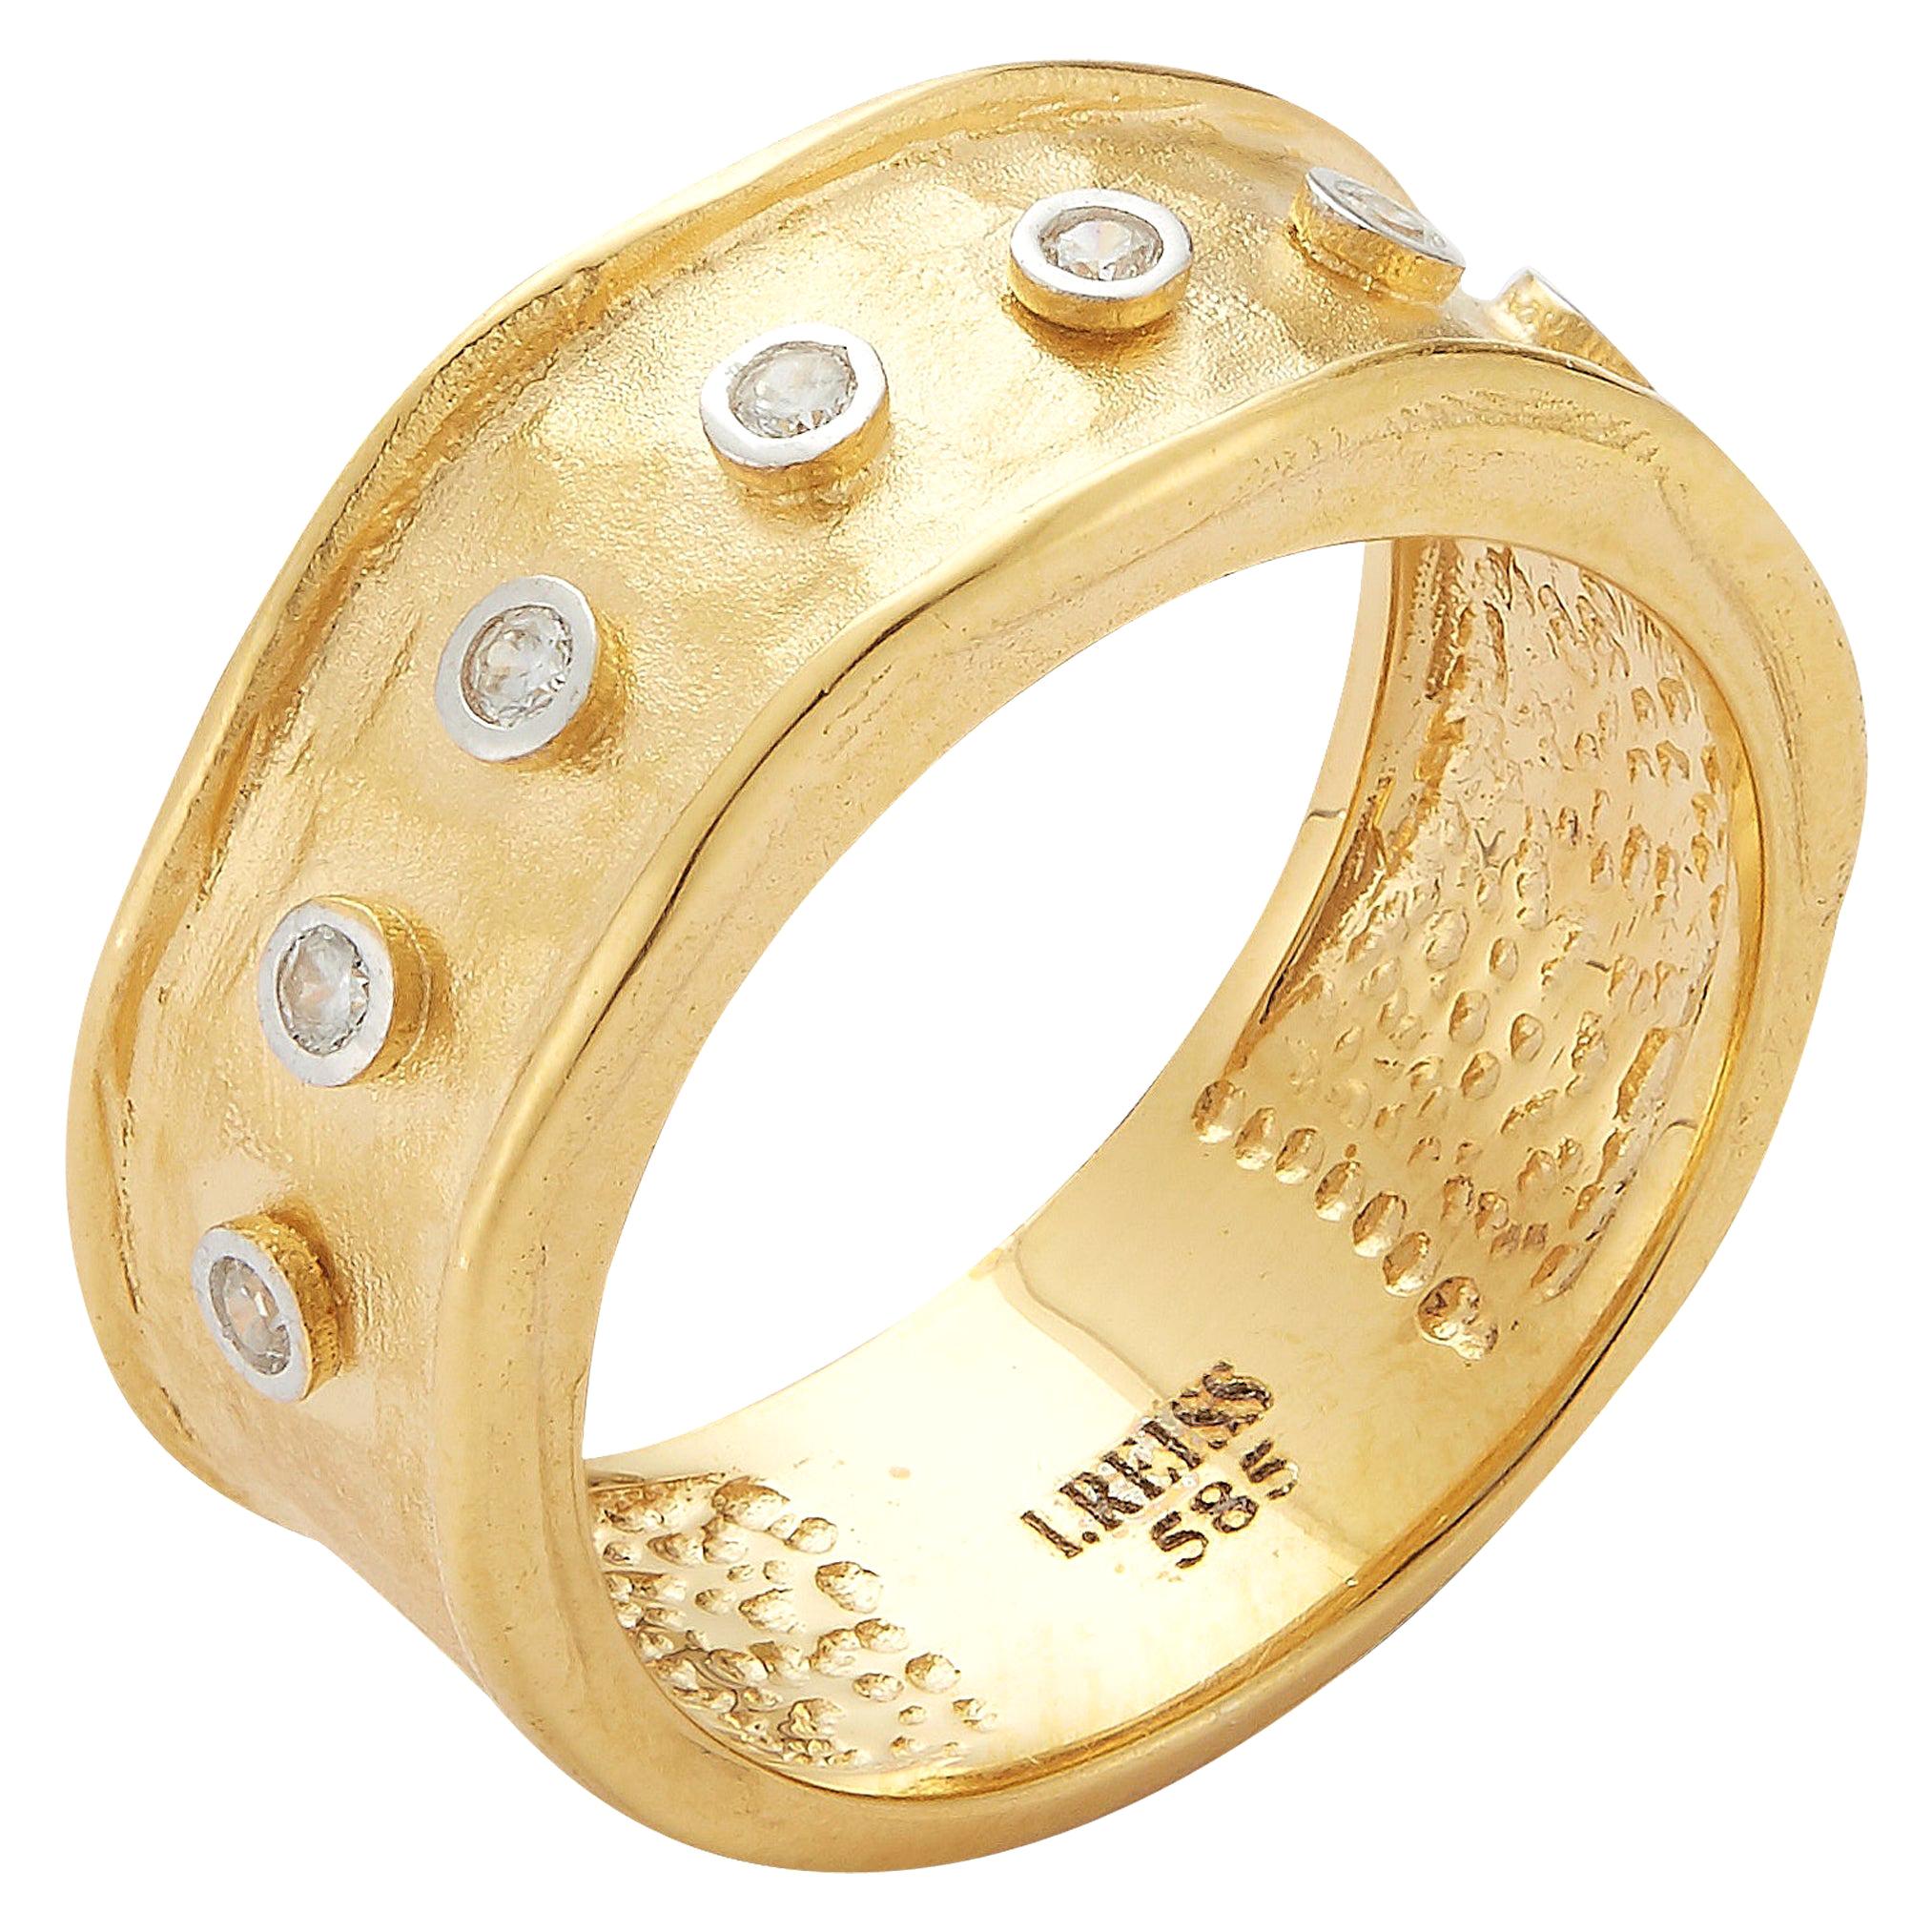 Handcrafted 14 Karat Yellow Gold Hammered Narrow Rings with Bezel Diamonds